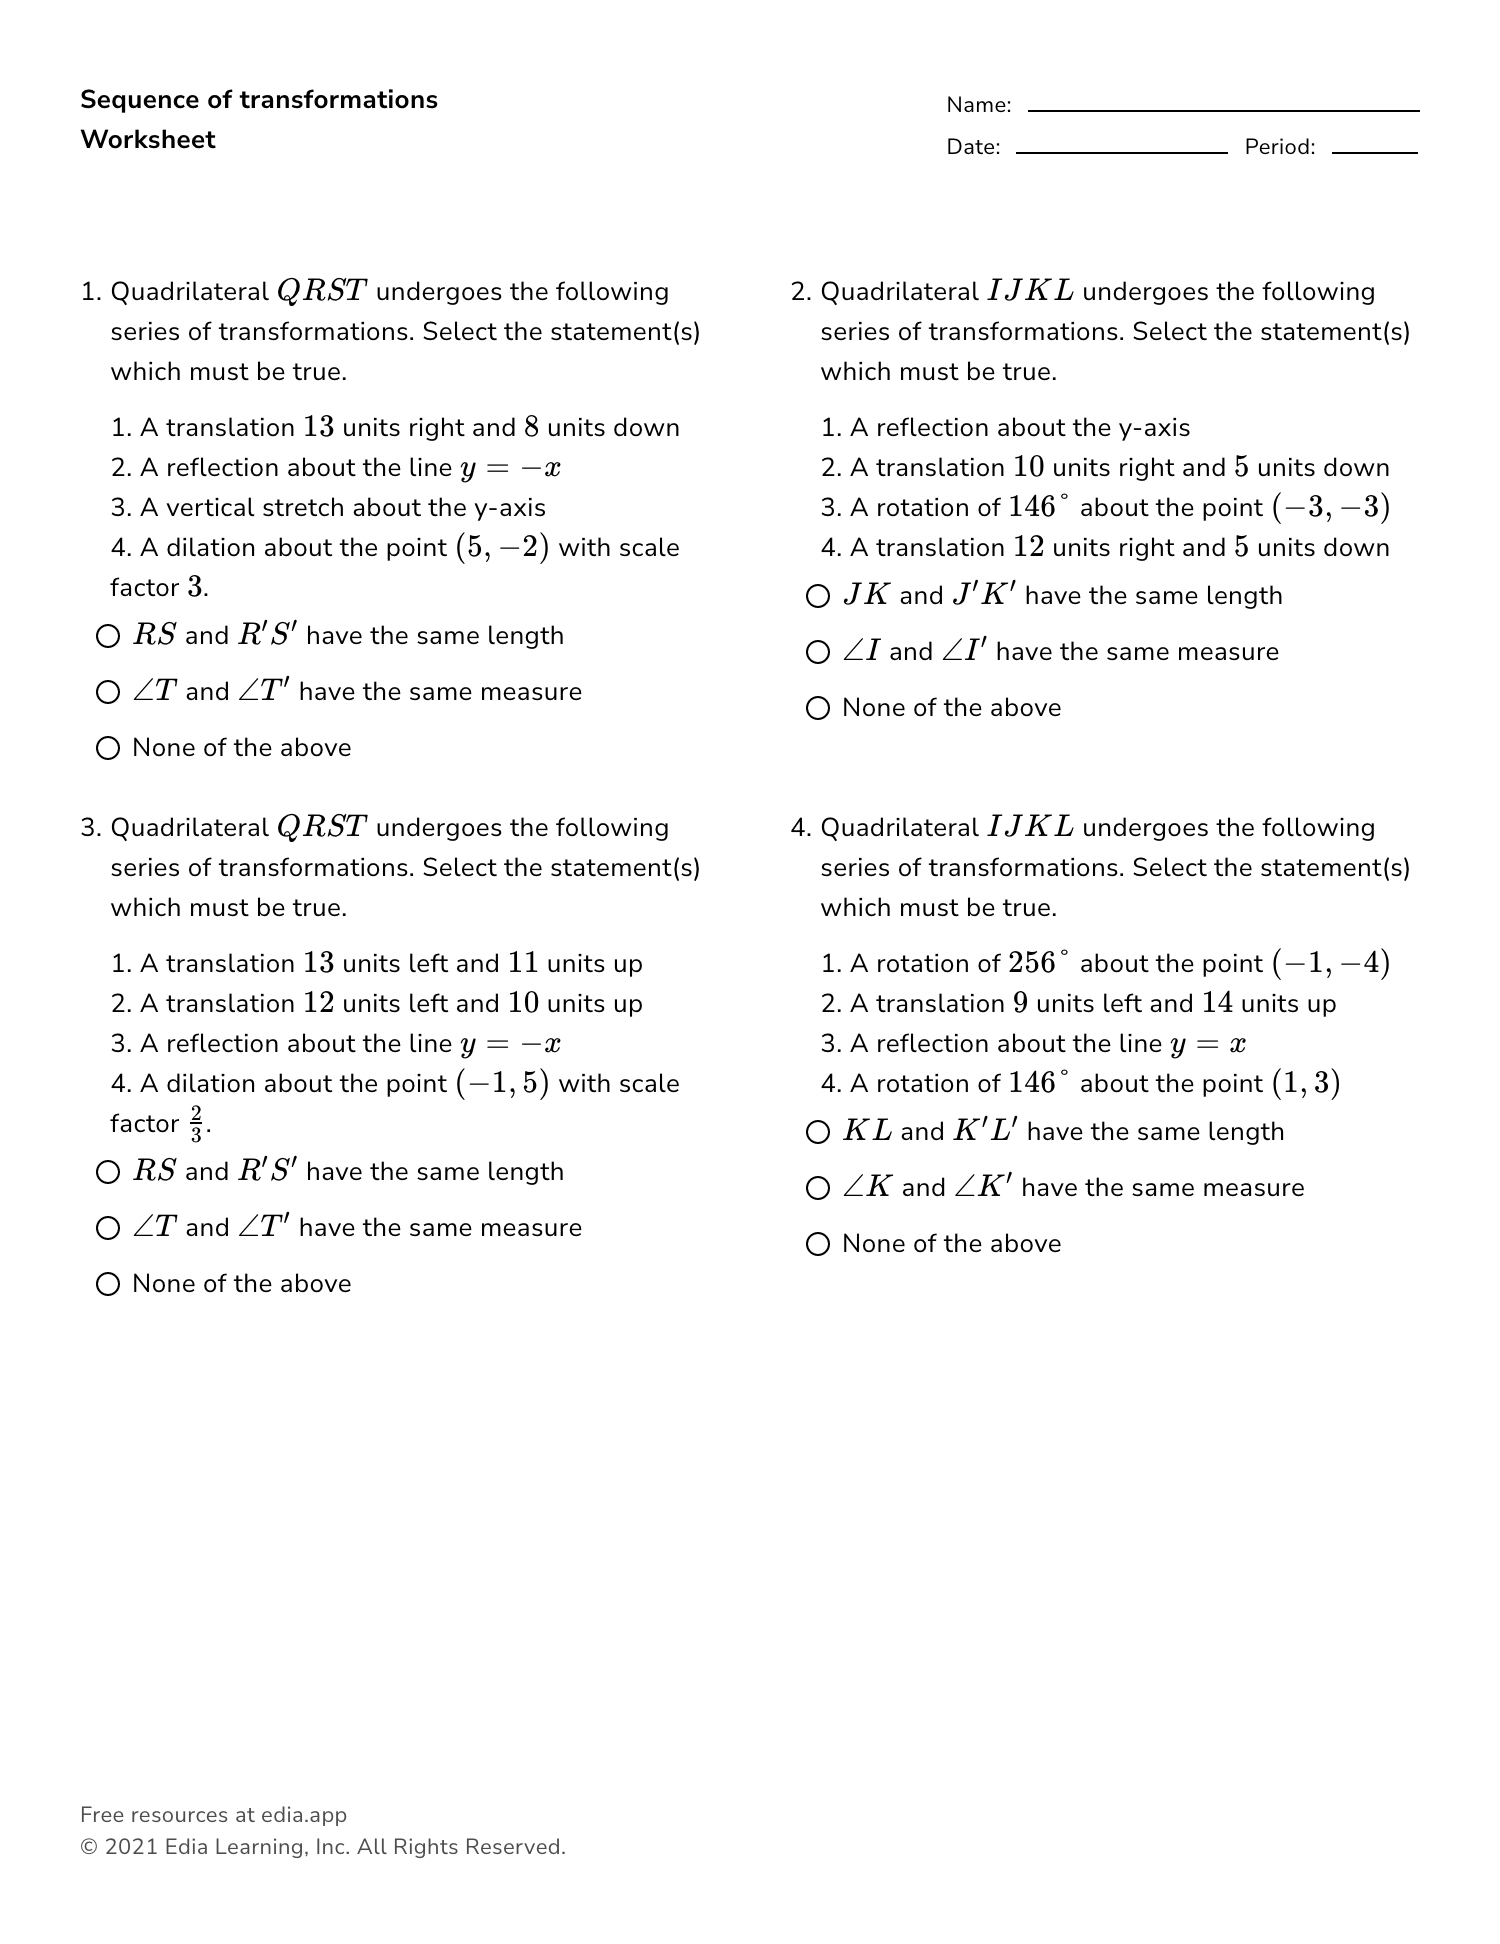 Sequence Of Transformations - Worksheet Throughout Sequence Of Transformations Worksheet